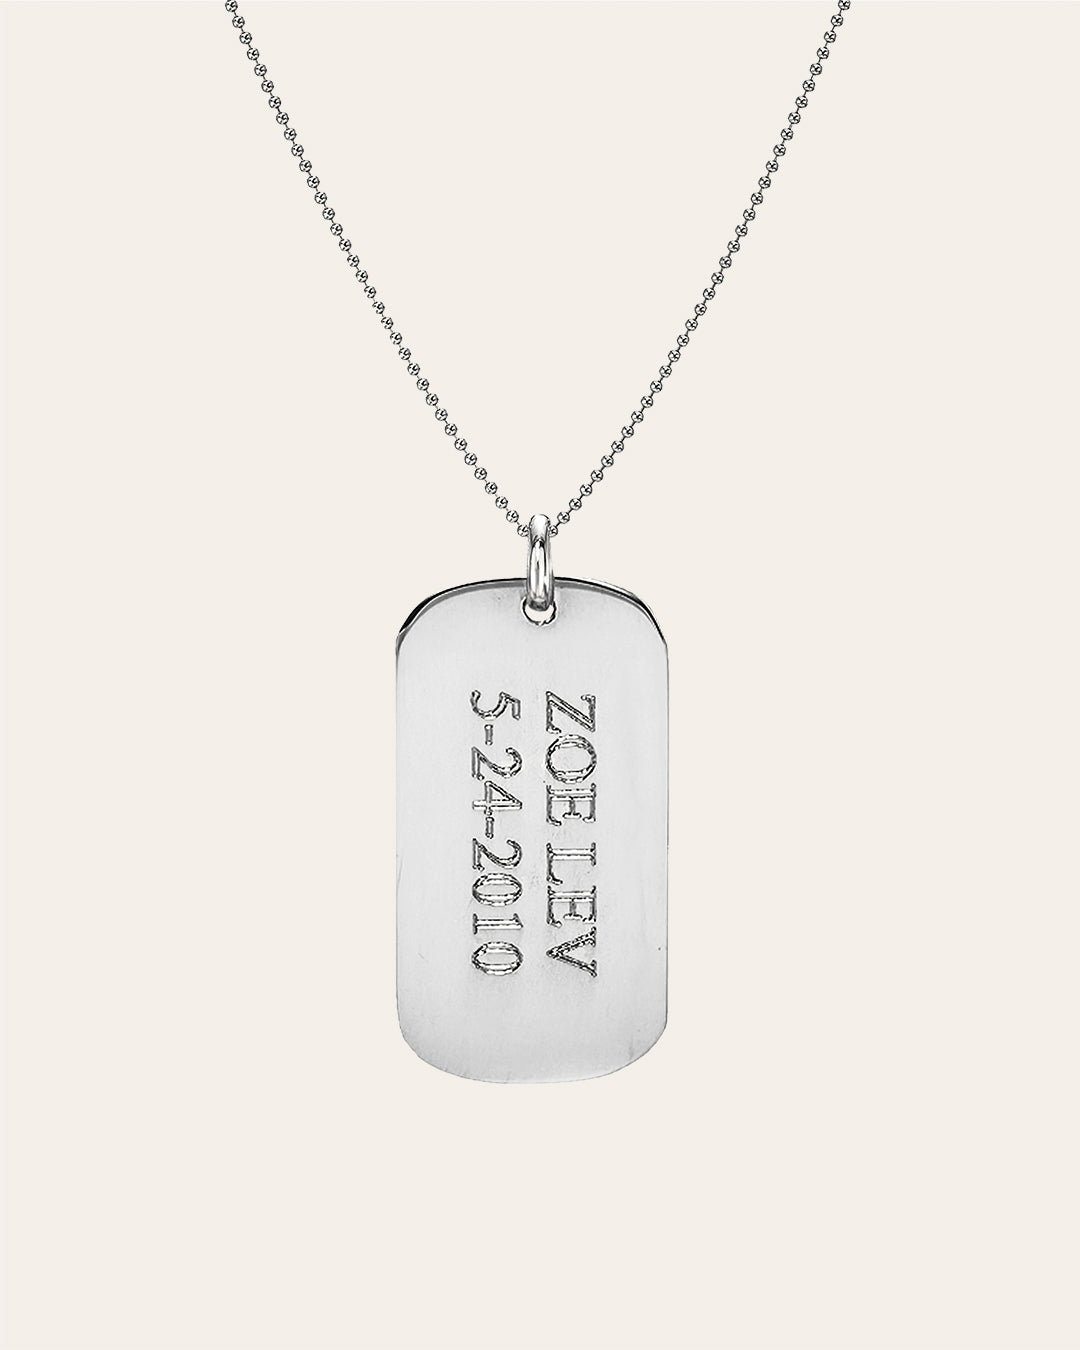 Mens Necklace Rustic Dog Tag Handmade in Sterling Silver - Etsy | Necklace, Men's  necklace, Necklace sizes